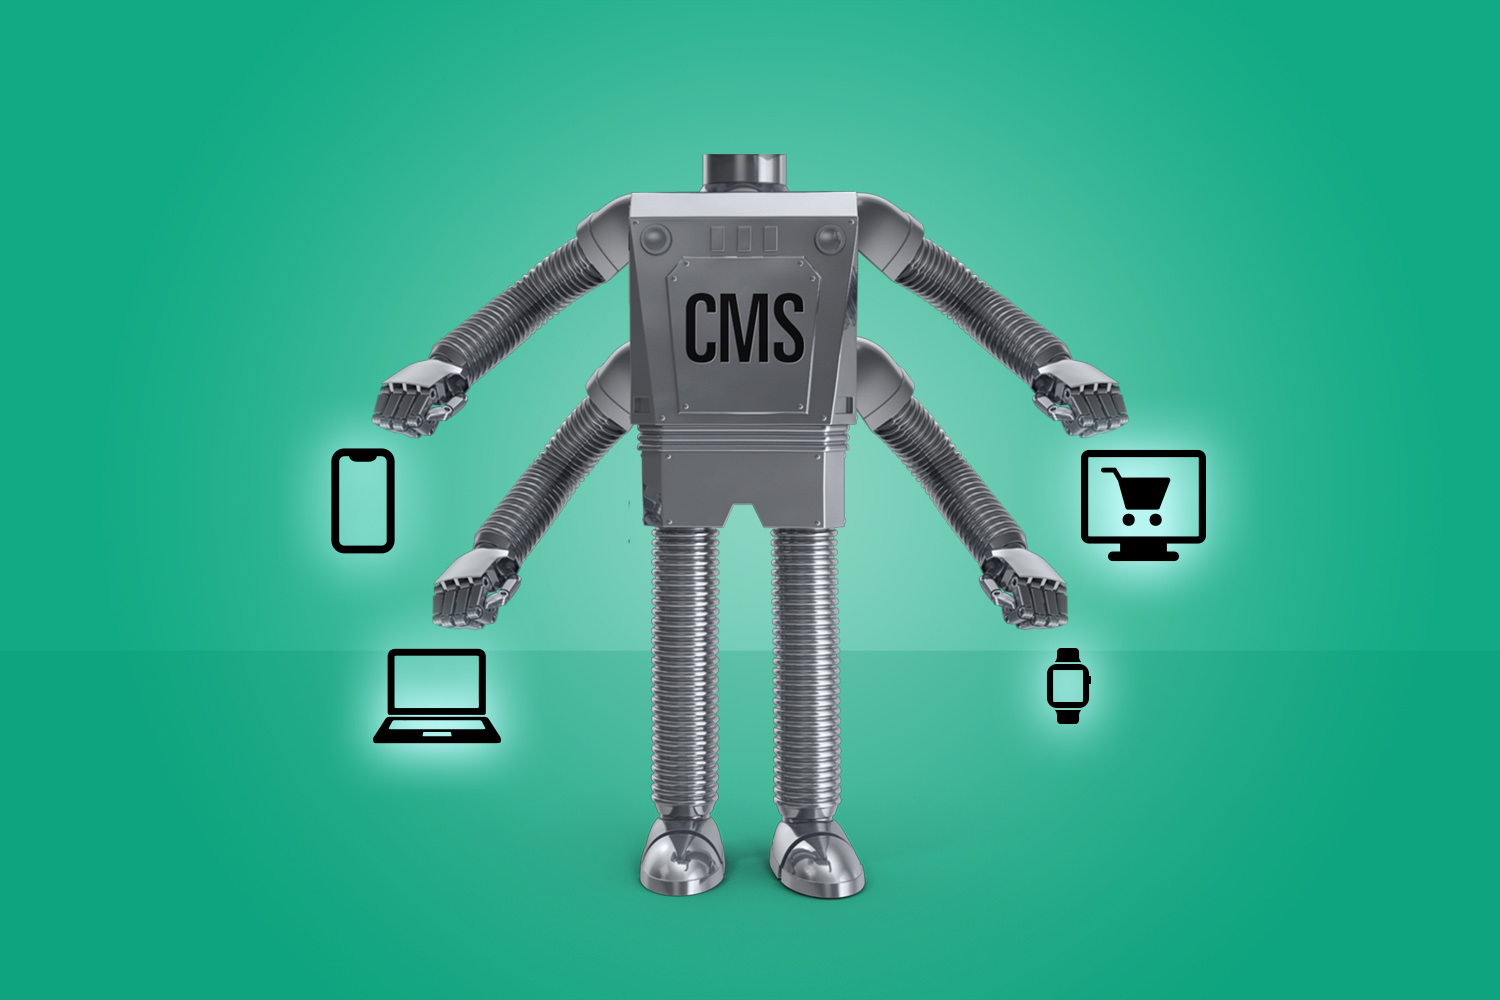 A depiction of headless CMS using a robot extending to different viewing platforms.